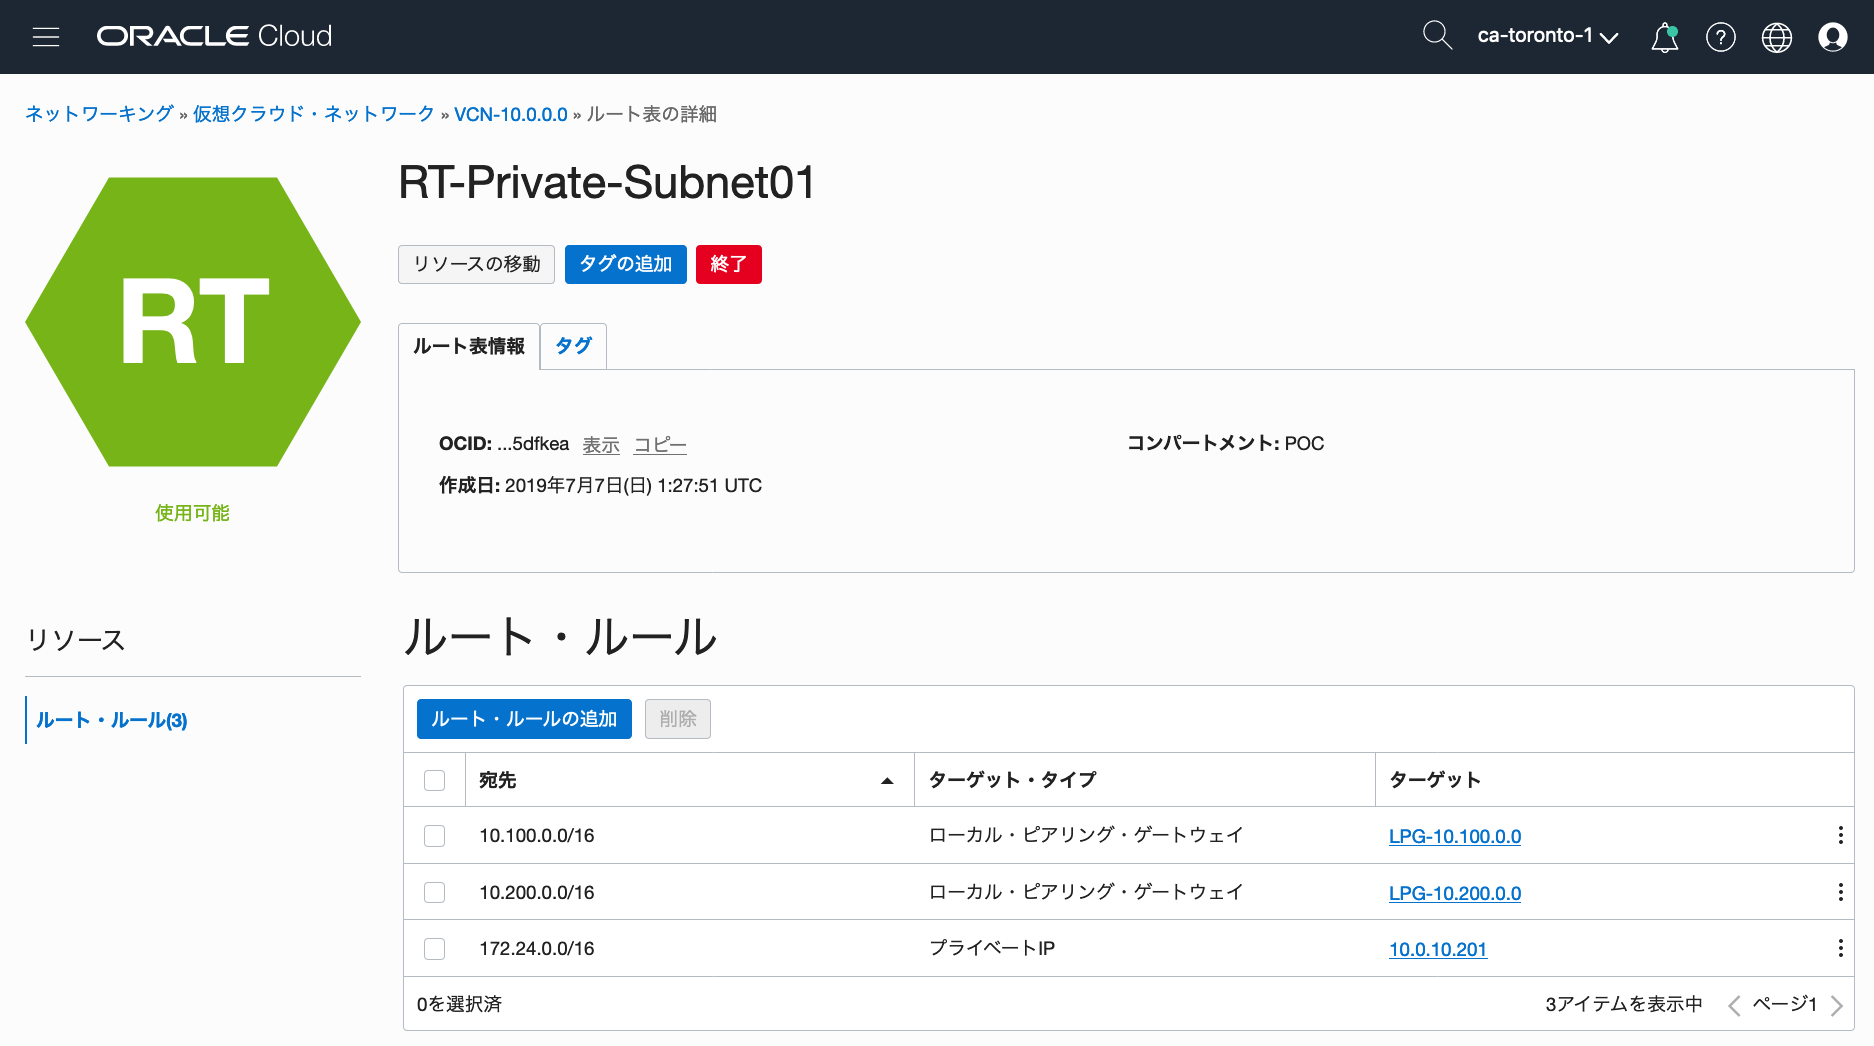 ②Hub-RT-Private-Subnet01.png